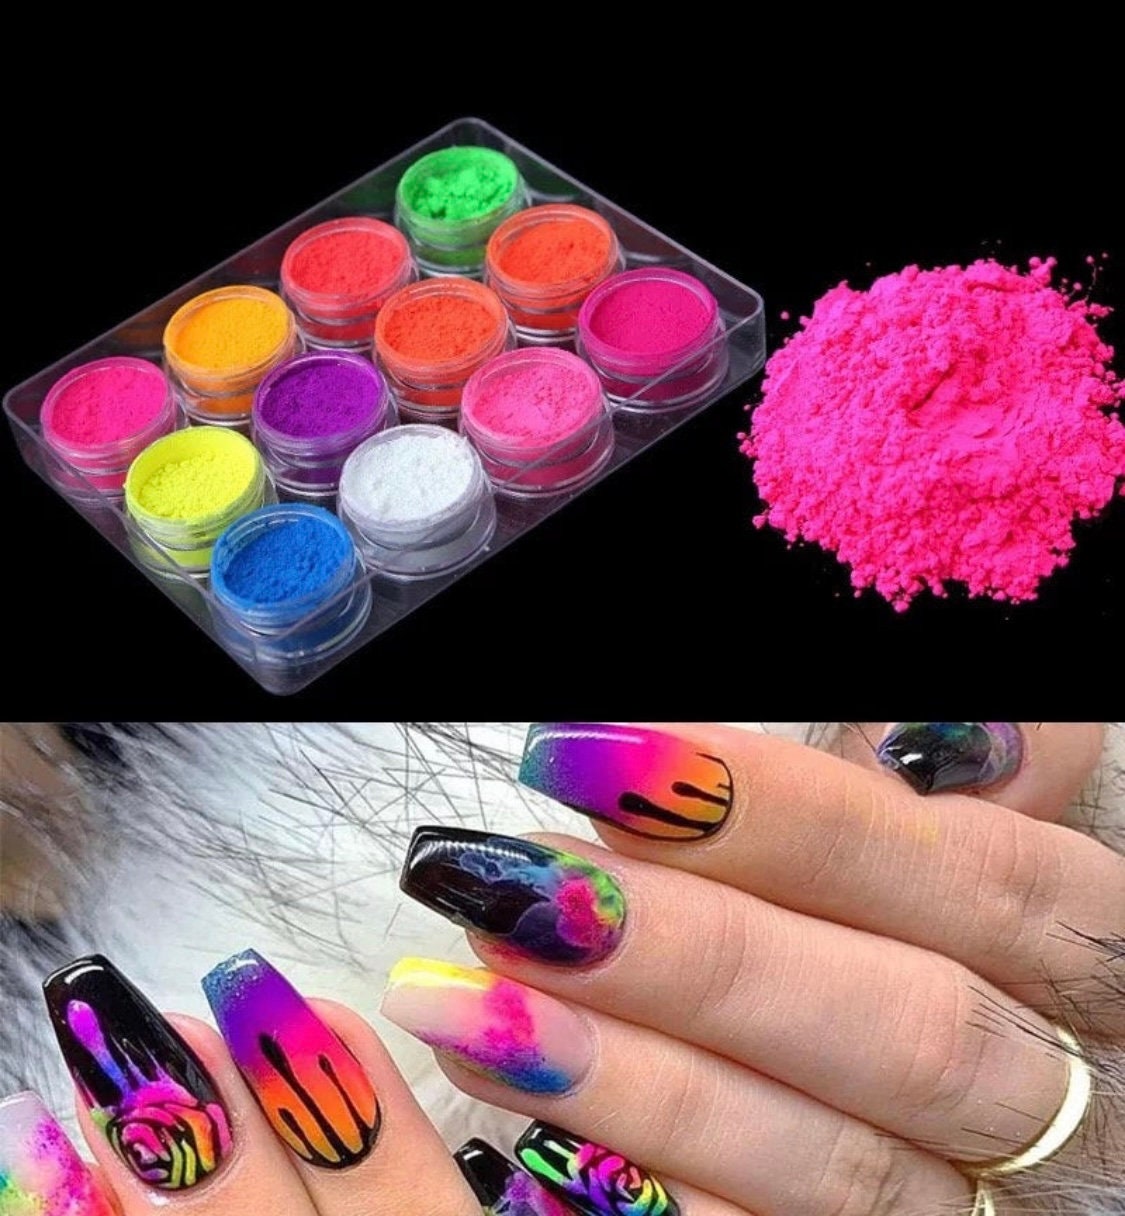 Set Of Neon Florescent Glow In The Dark Opal Acrylic Nail Puffs With Acne  And Crystal Sculpture From Yoochoice, $1.8